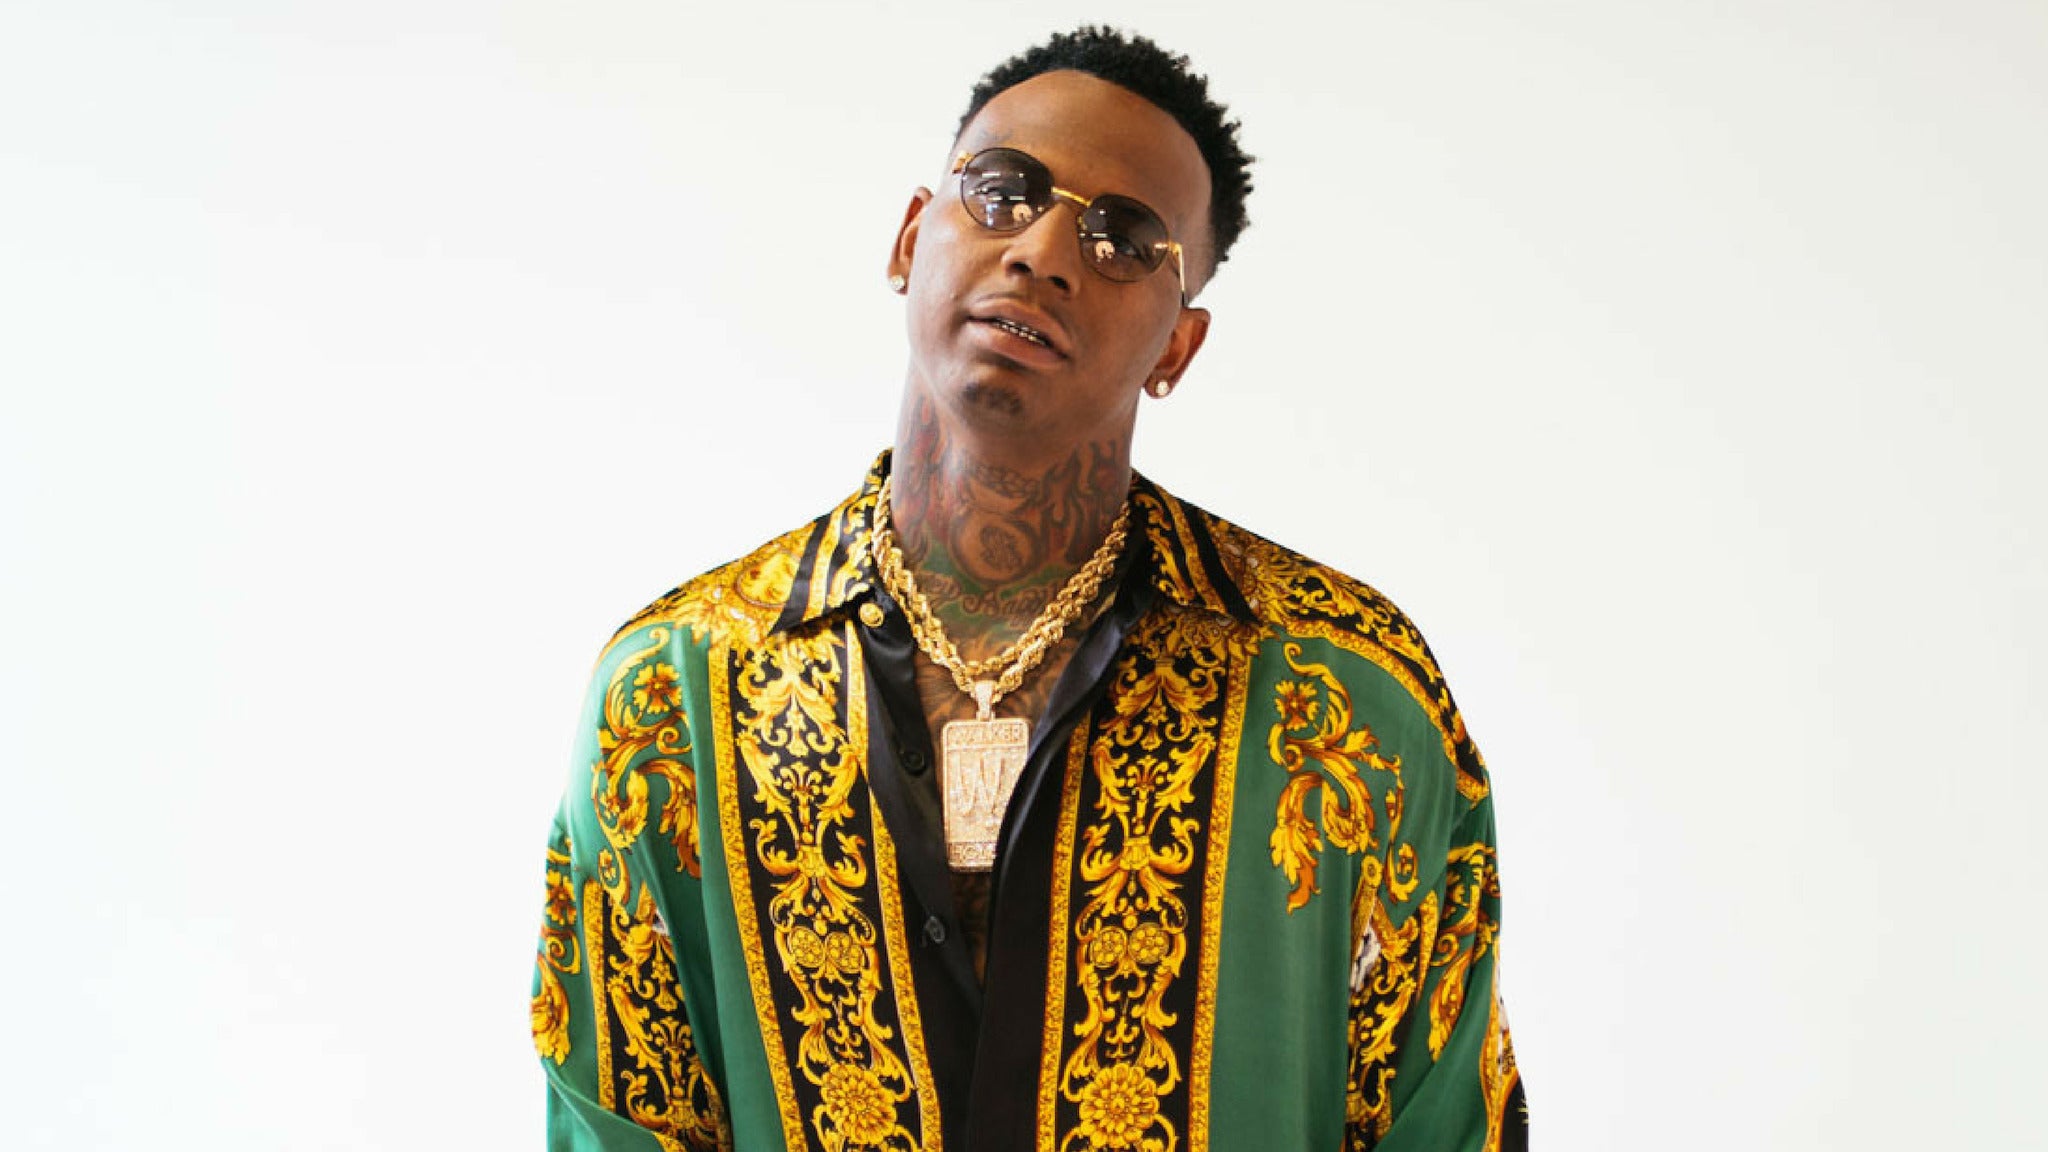 Moneybagg Yo - Word 4 Word Tour in Minneapolis promo photo for Live Nation Mobile App presale offer code